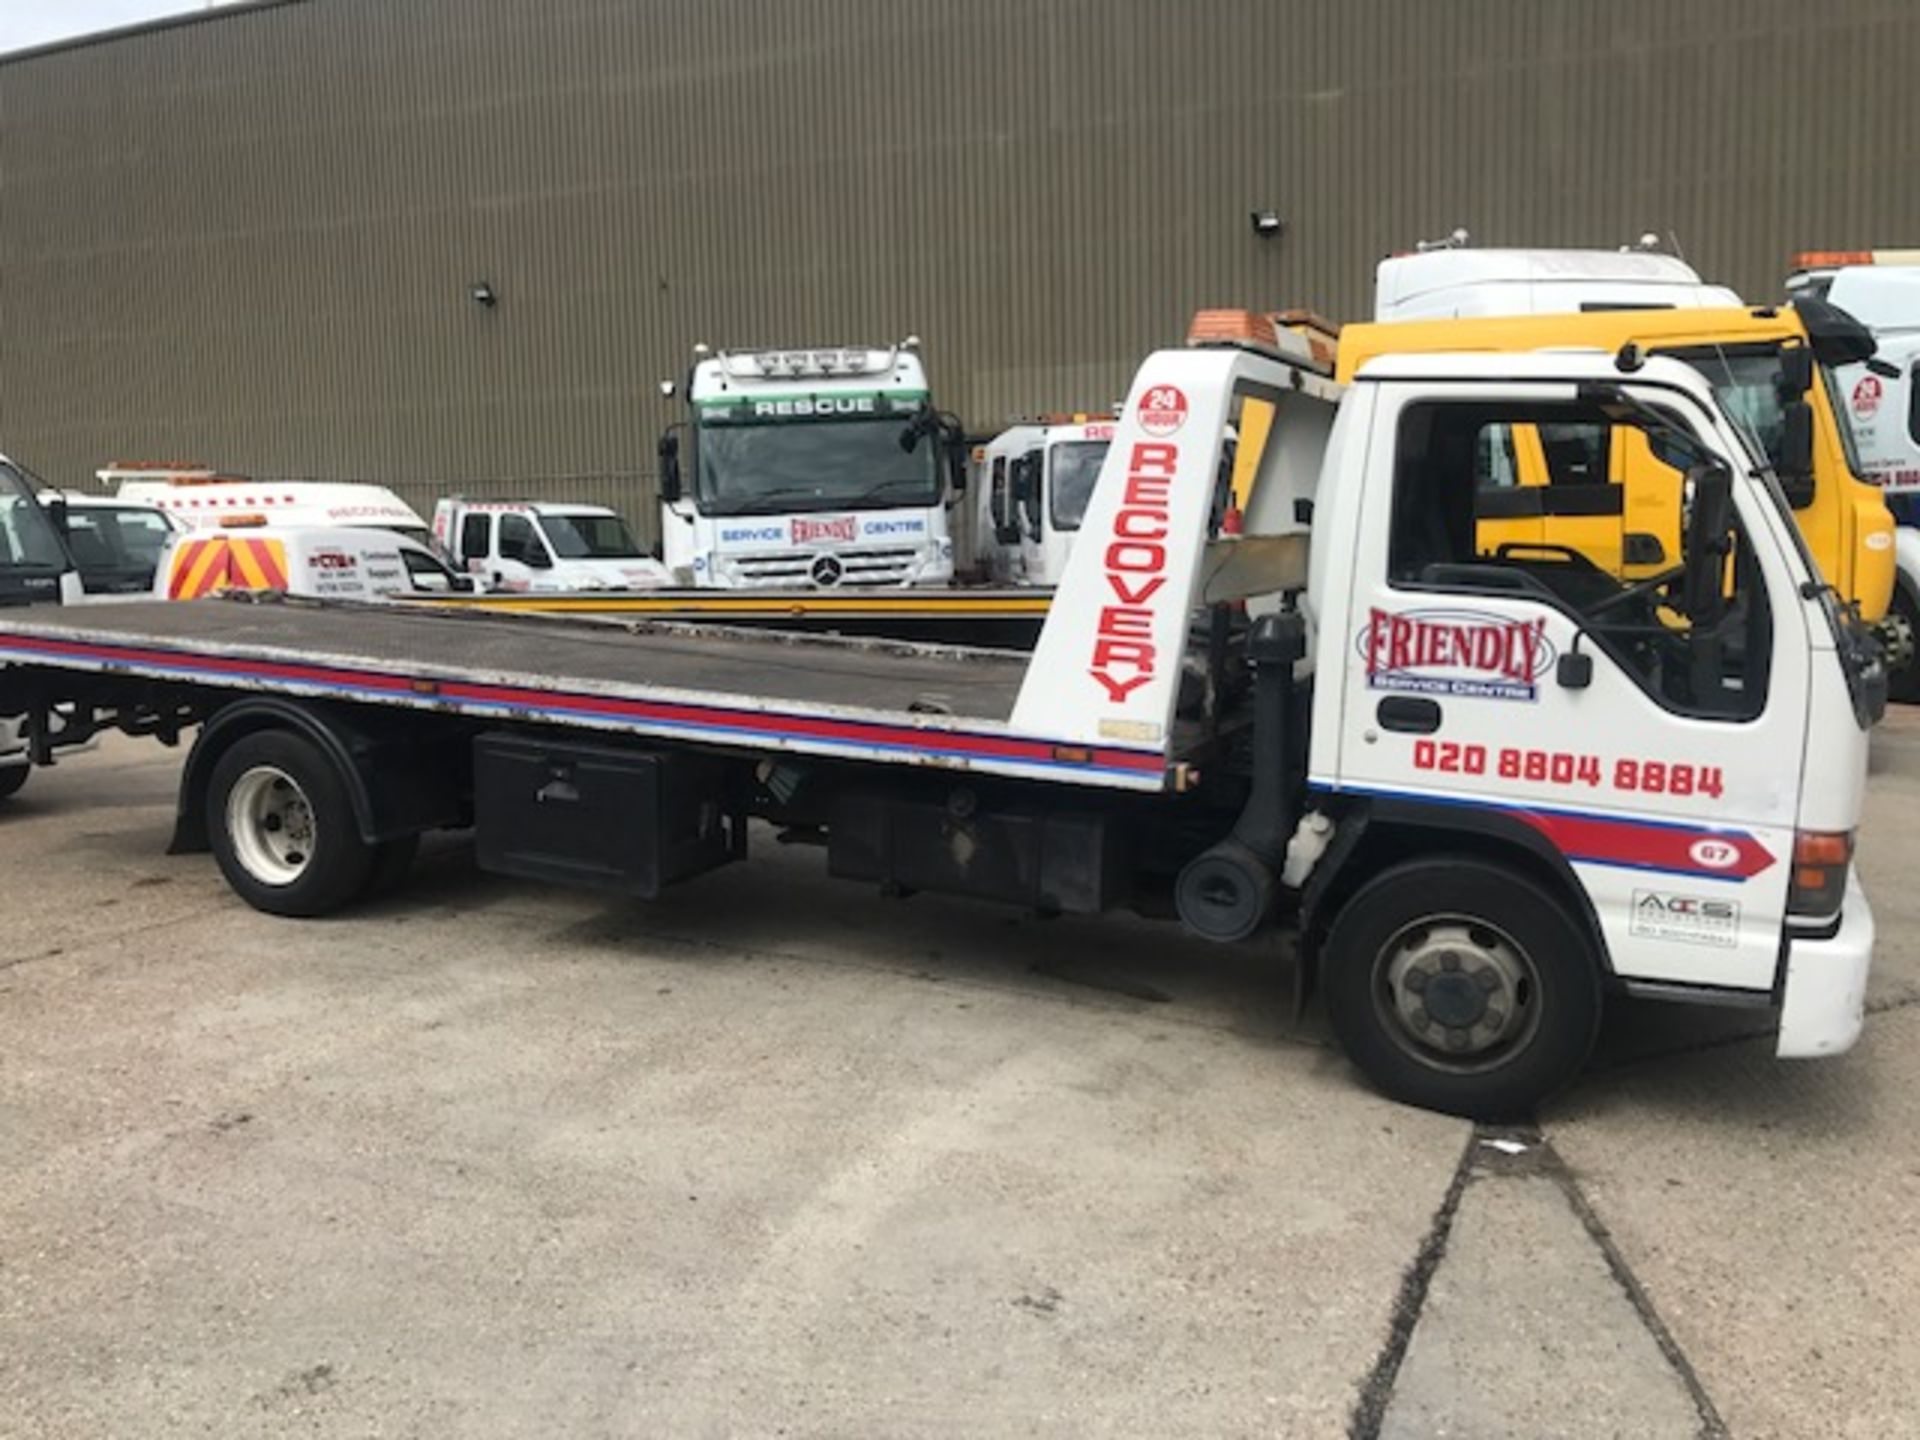 2005 Isuzu NQR 70 7.5T breakdown recovery vehicle compleat with powertec body with winch and - Image 3 of 11